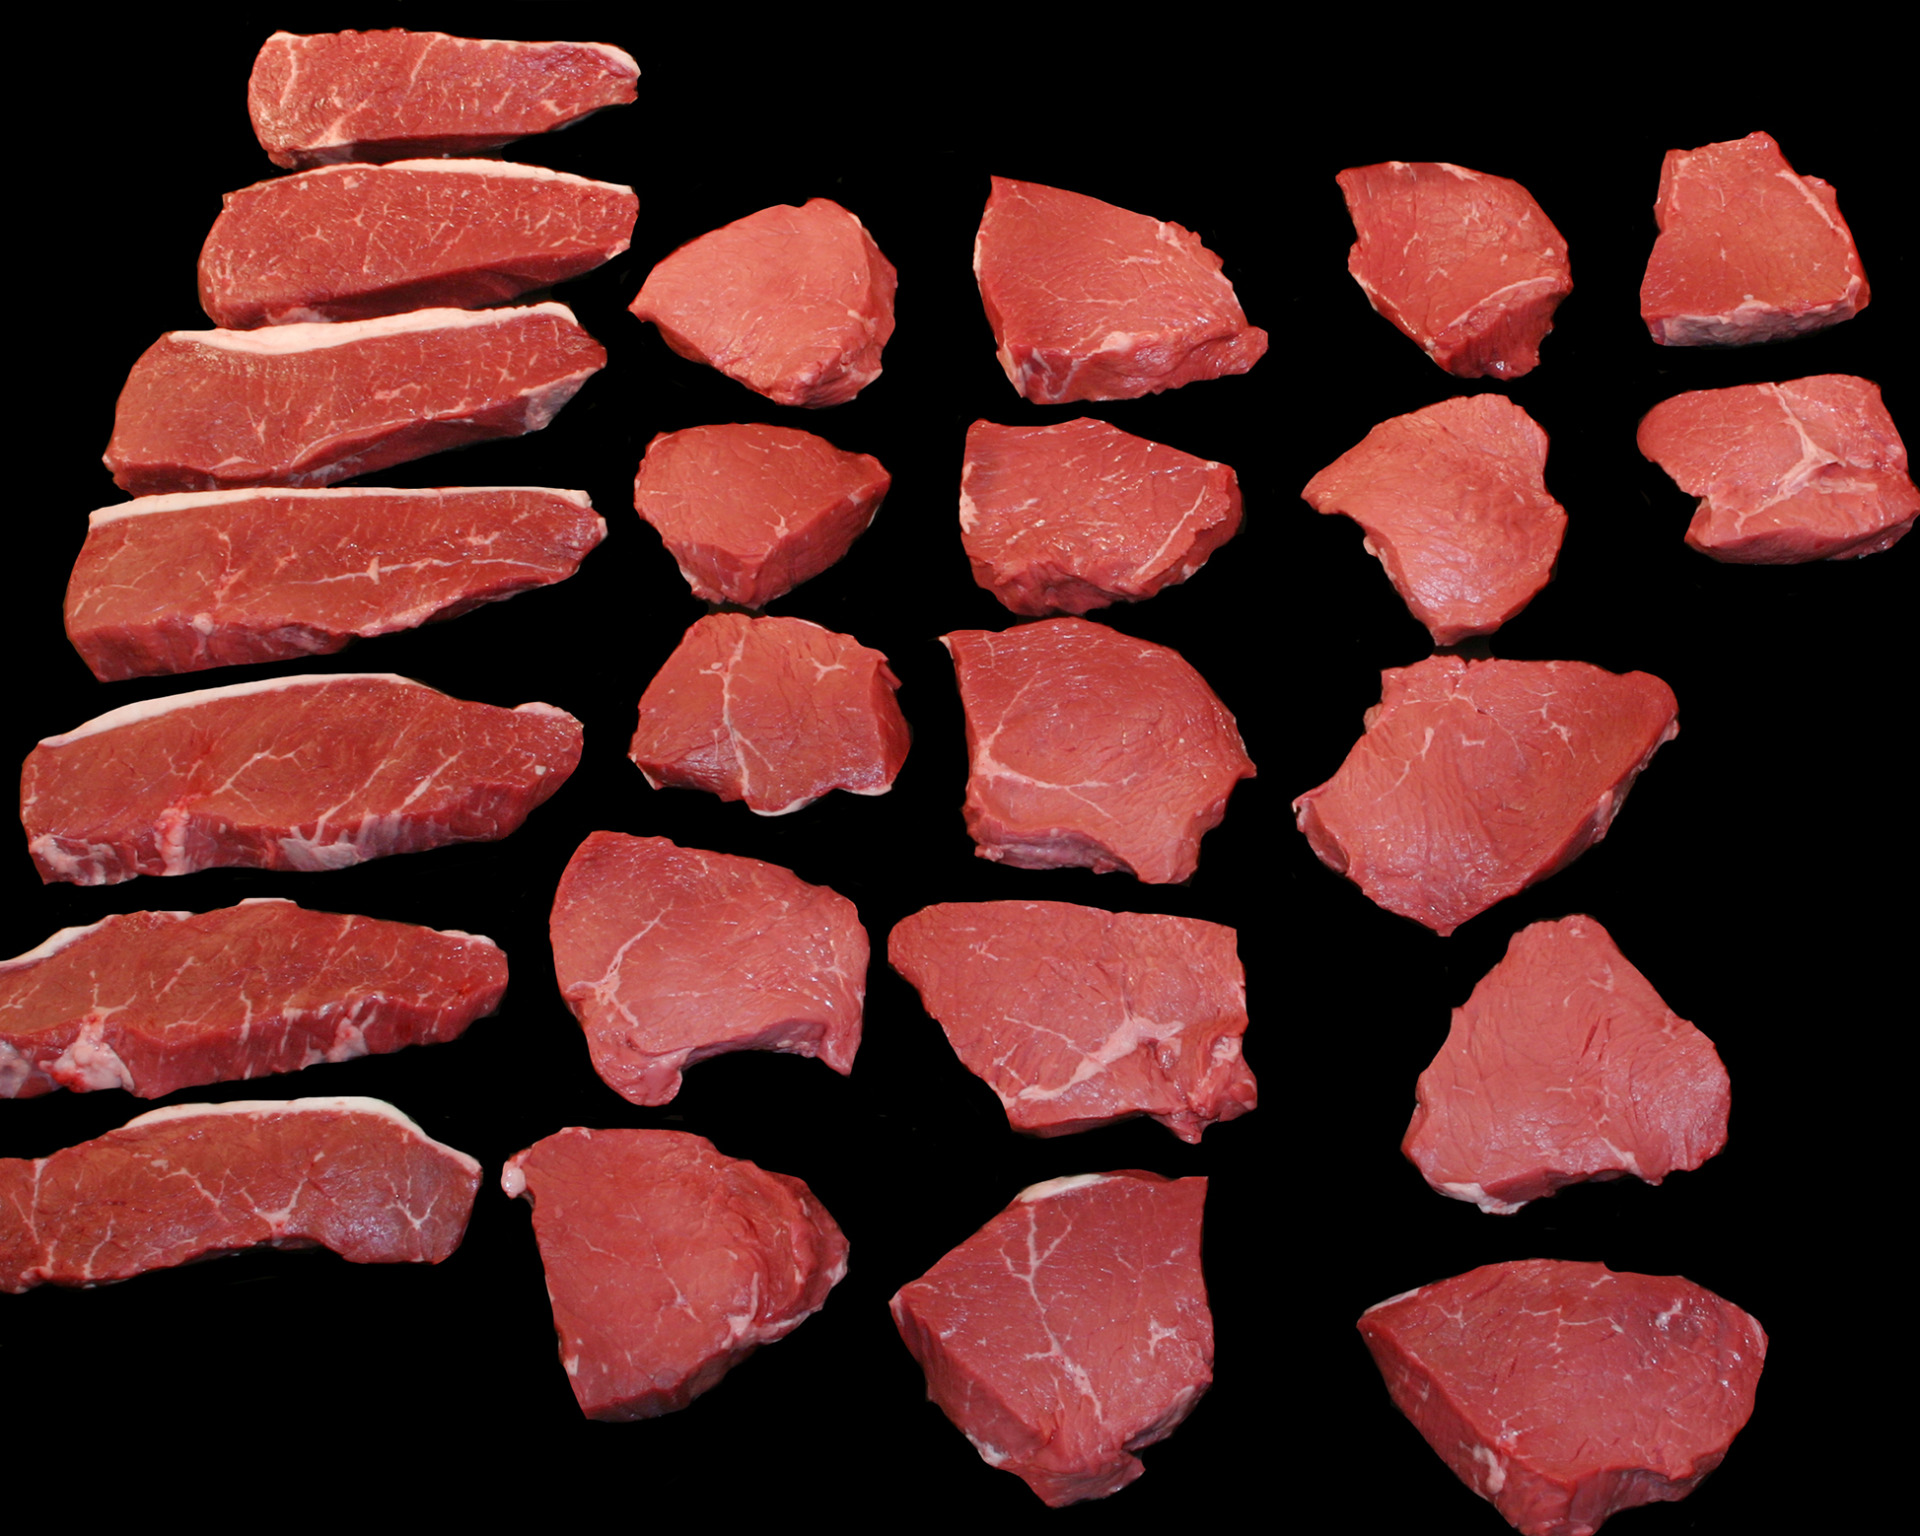 Basic Cuts of Beef